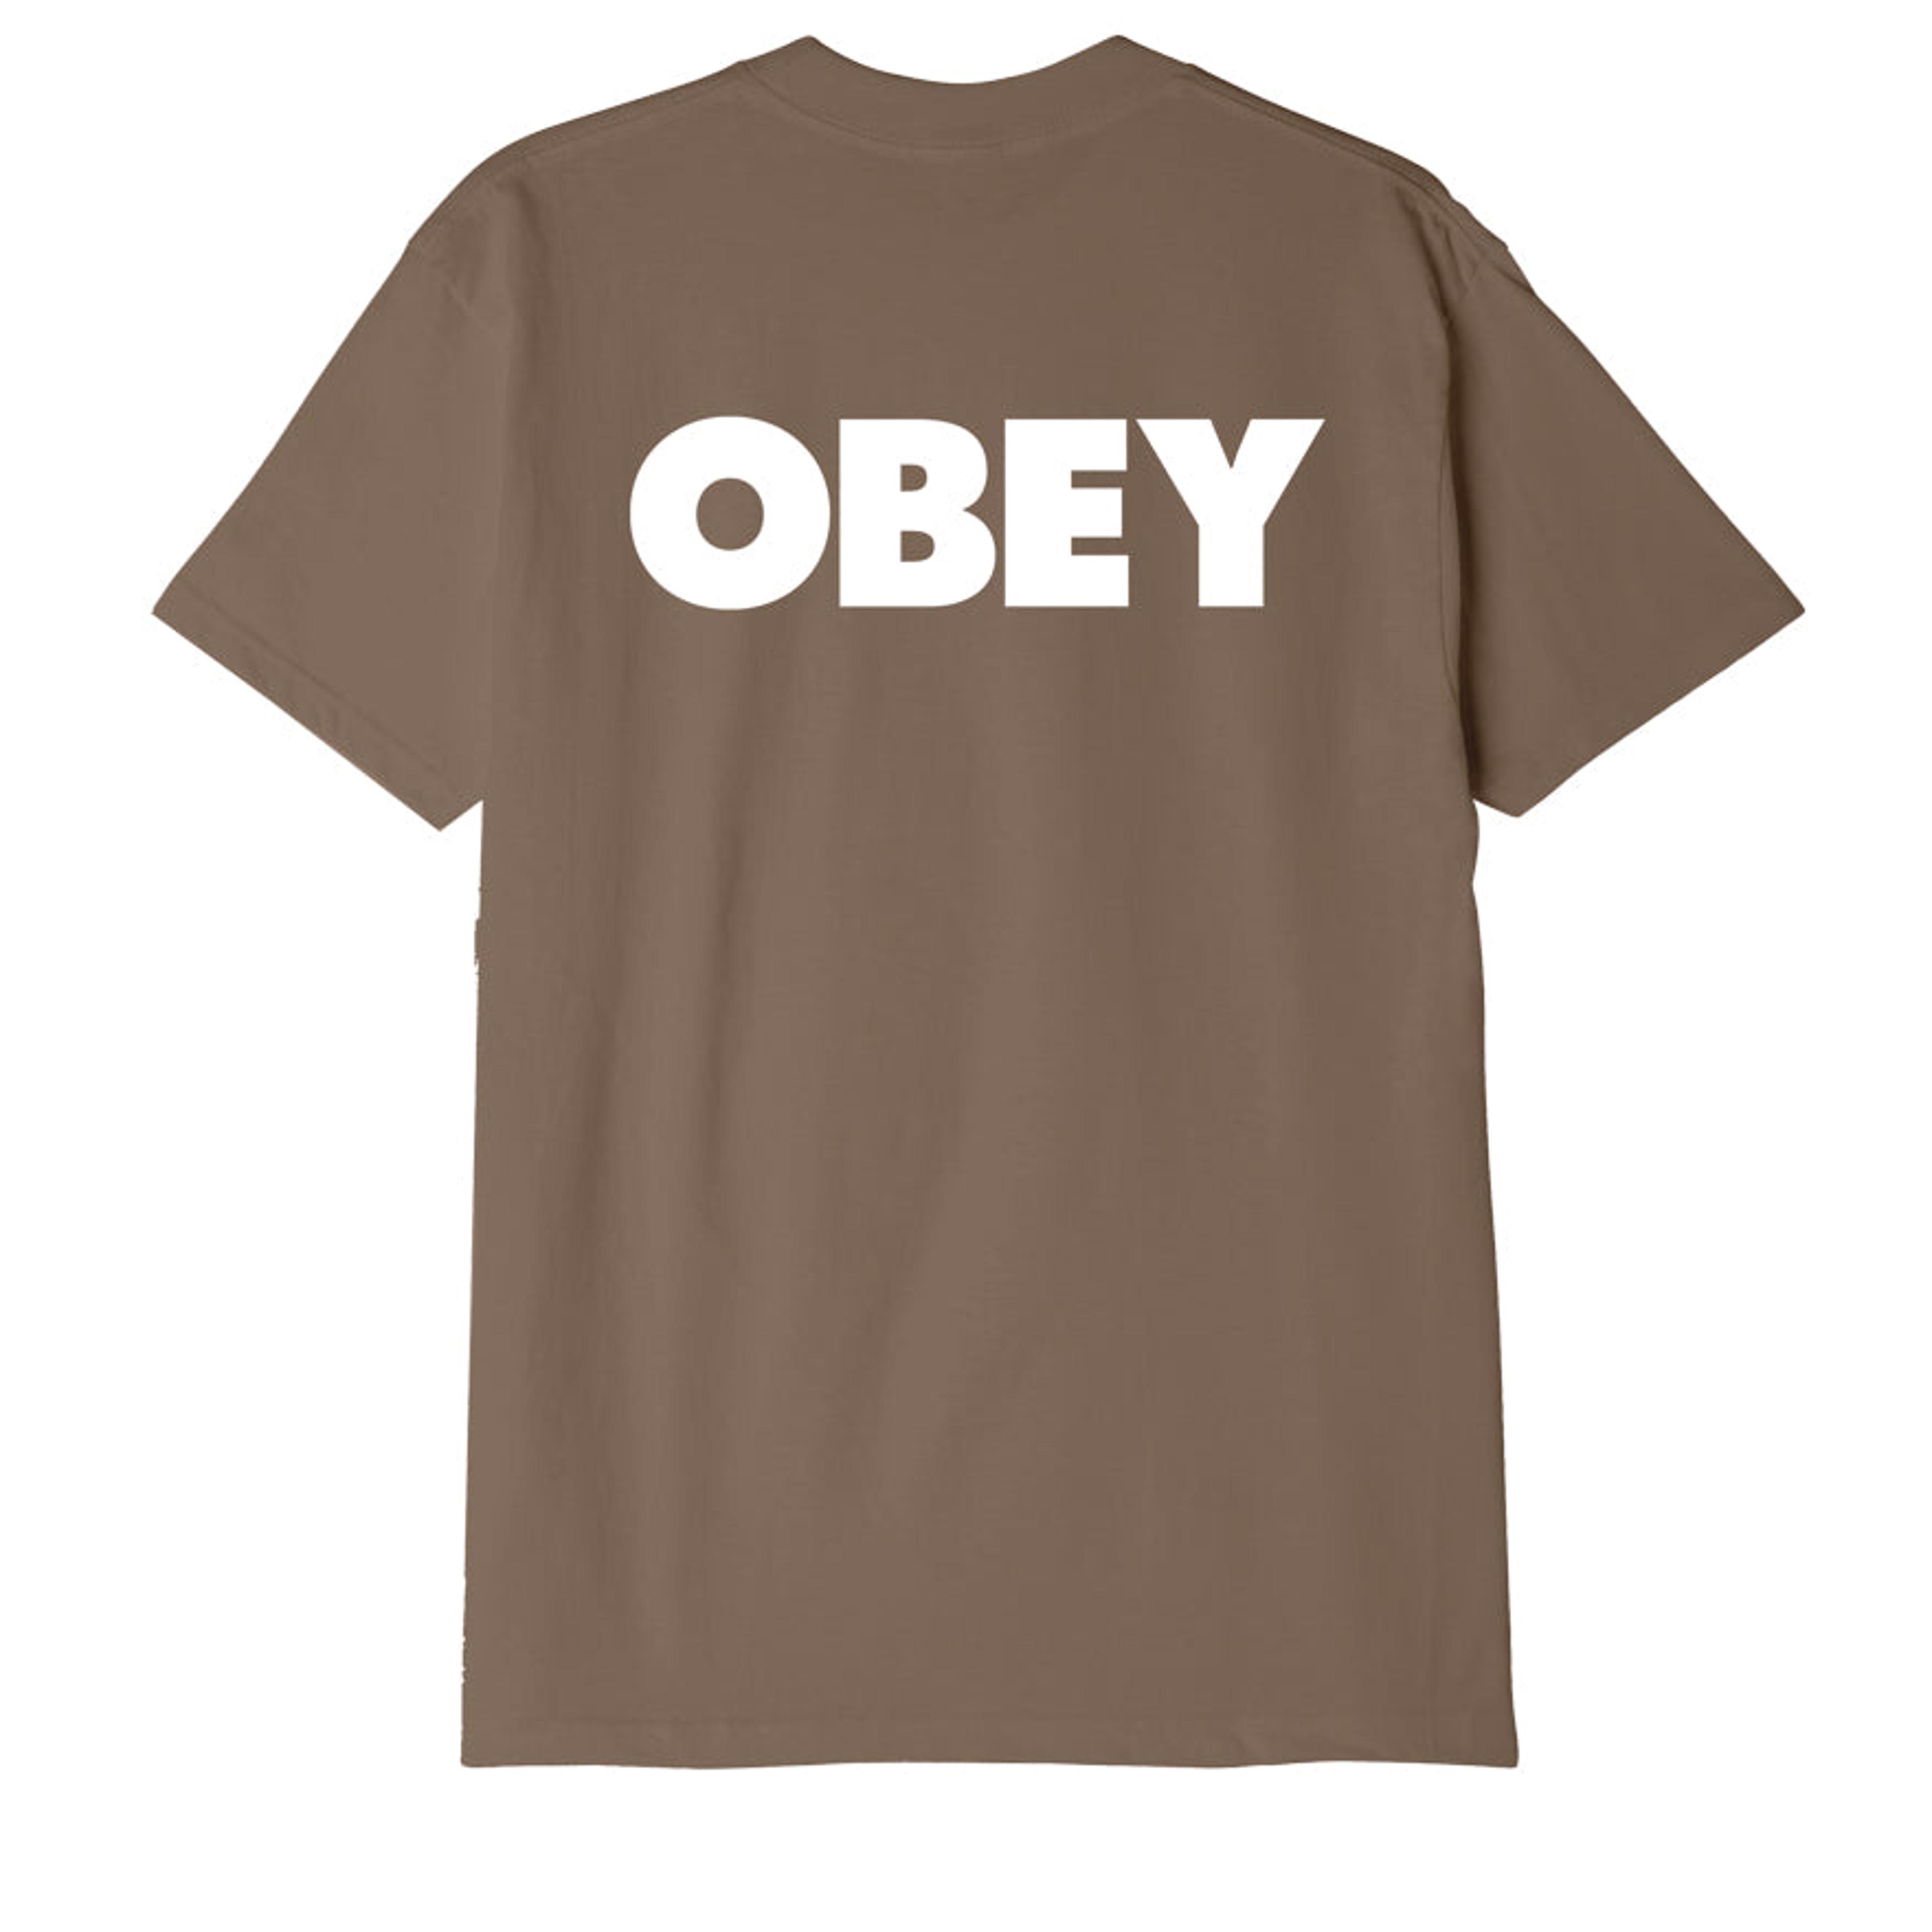 Alternate View 15 of BOLD OBEY II CLASSIC T-SHIRT